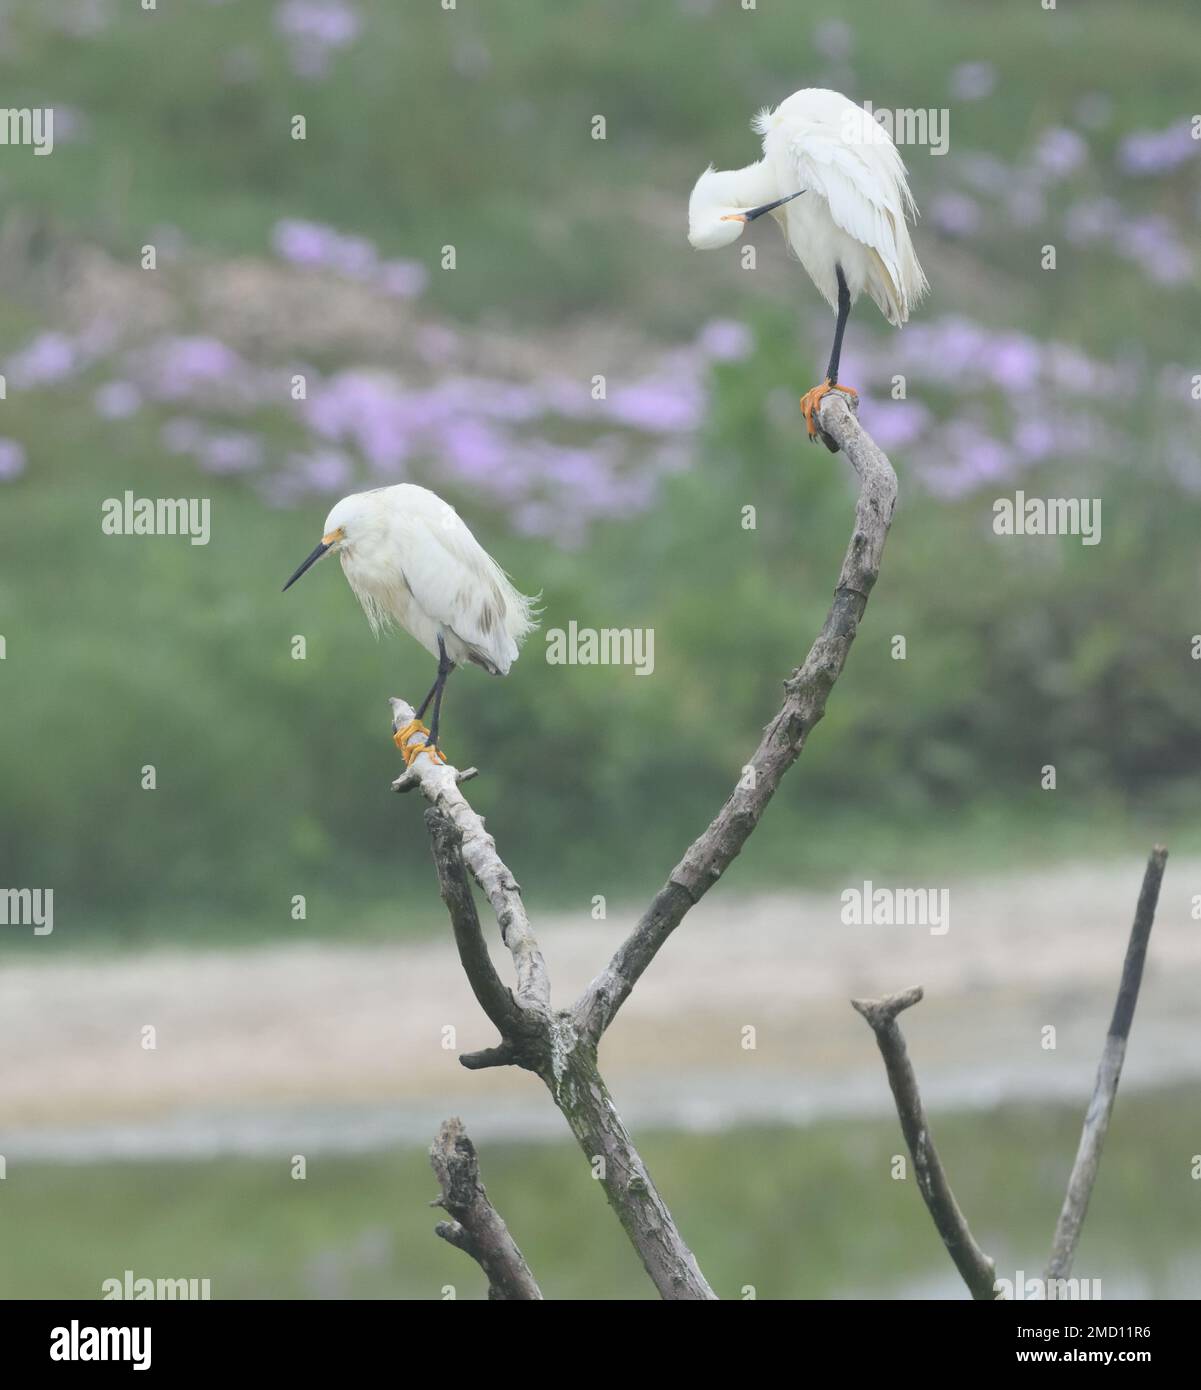 Two snowy egrets (Egretta thula) on a tree stump in a shallow pool. They displays the elegant plumes for which they were hunted in the twentieth centu Stock Photo